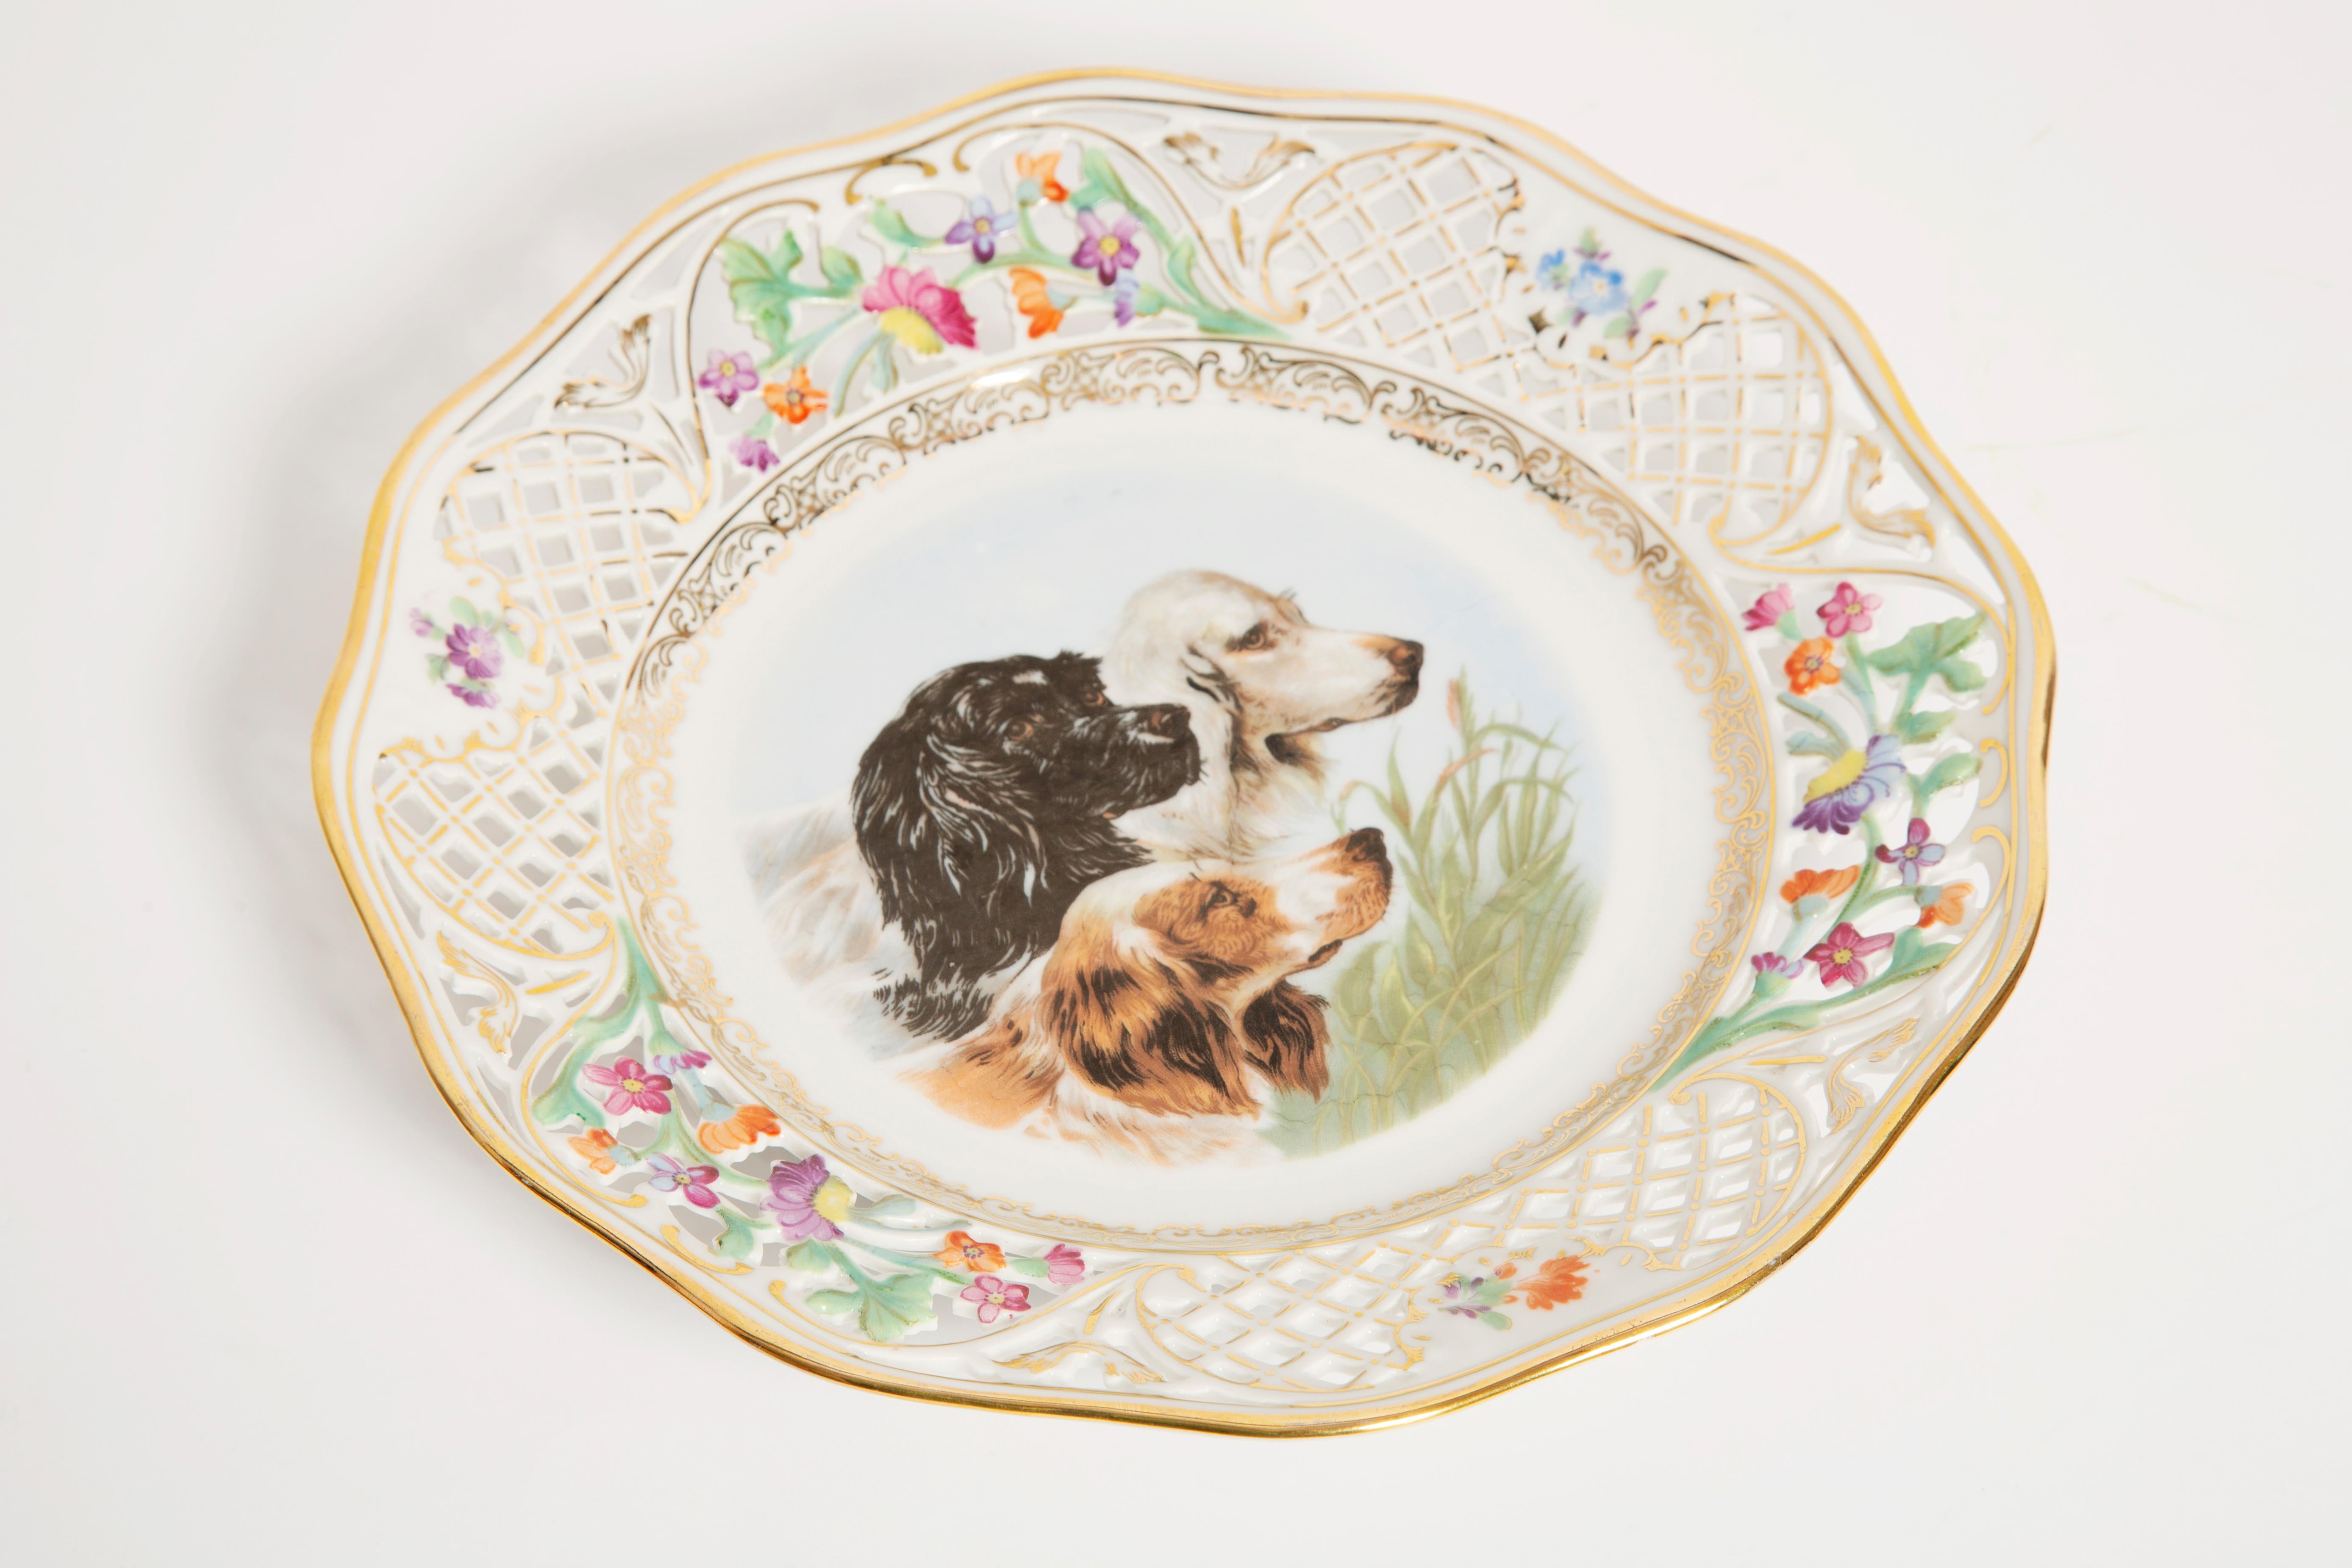 Decorative Spaniel Dogs plate from Bavaria, Germany. Produced in 1970s.
 The plate is hand painted. Plate is in very good vintage condition, no damage or cracks. Original glass. Beautiful piece for every interior! Only one unique piece.